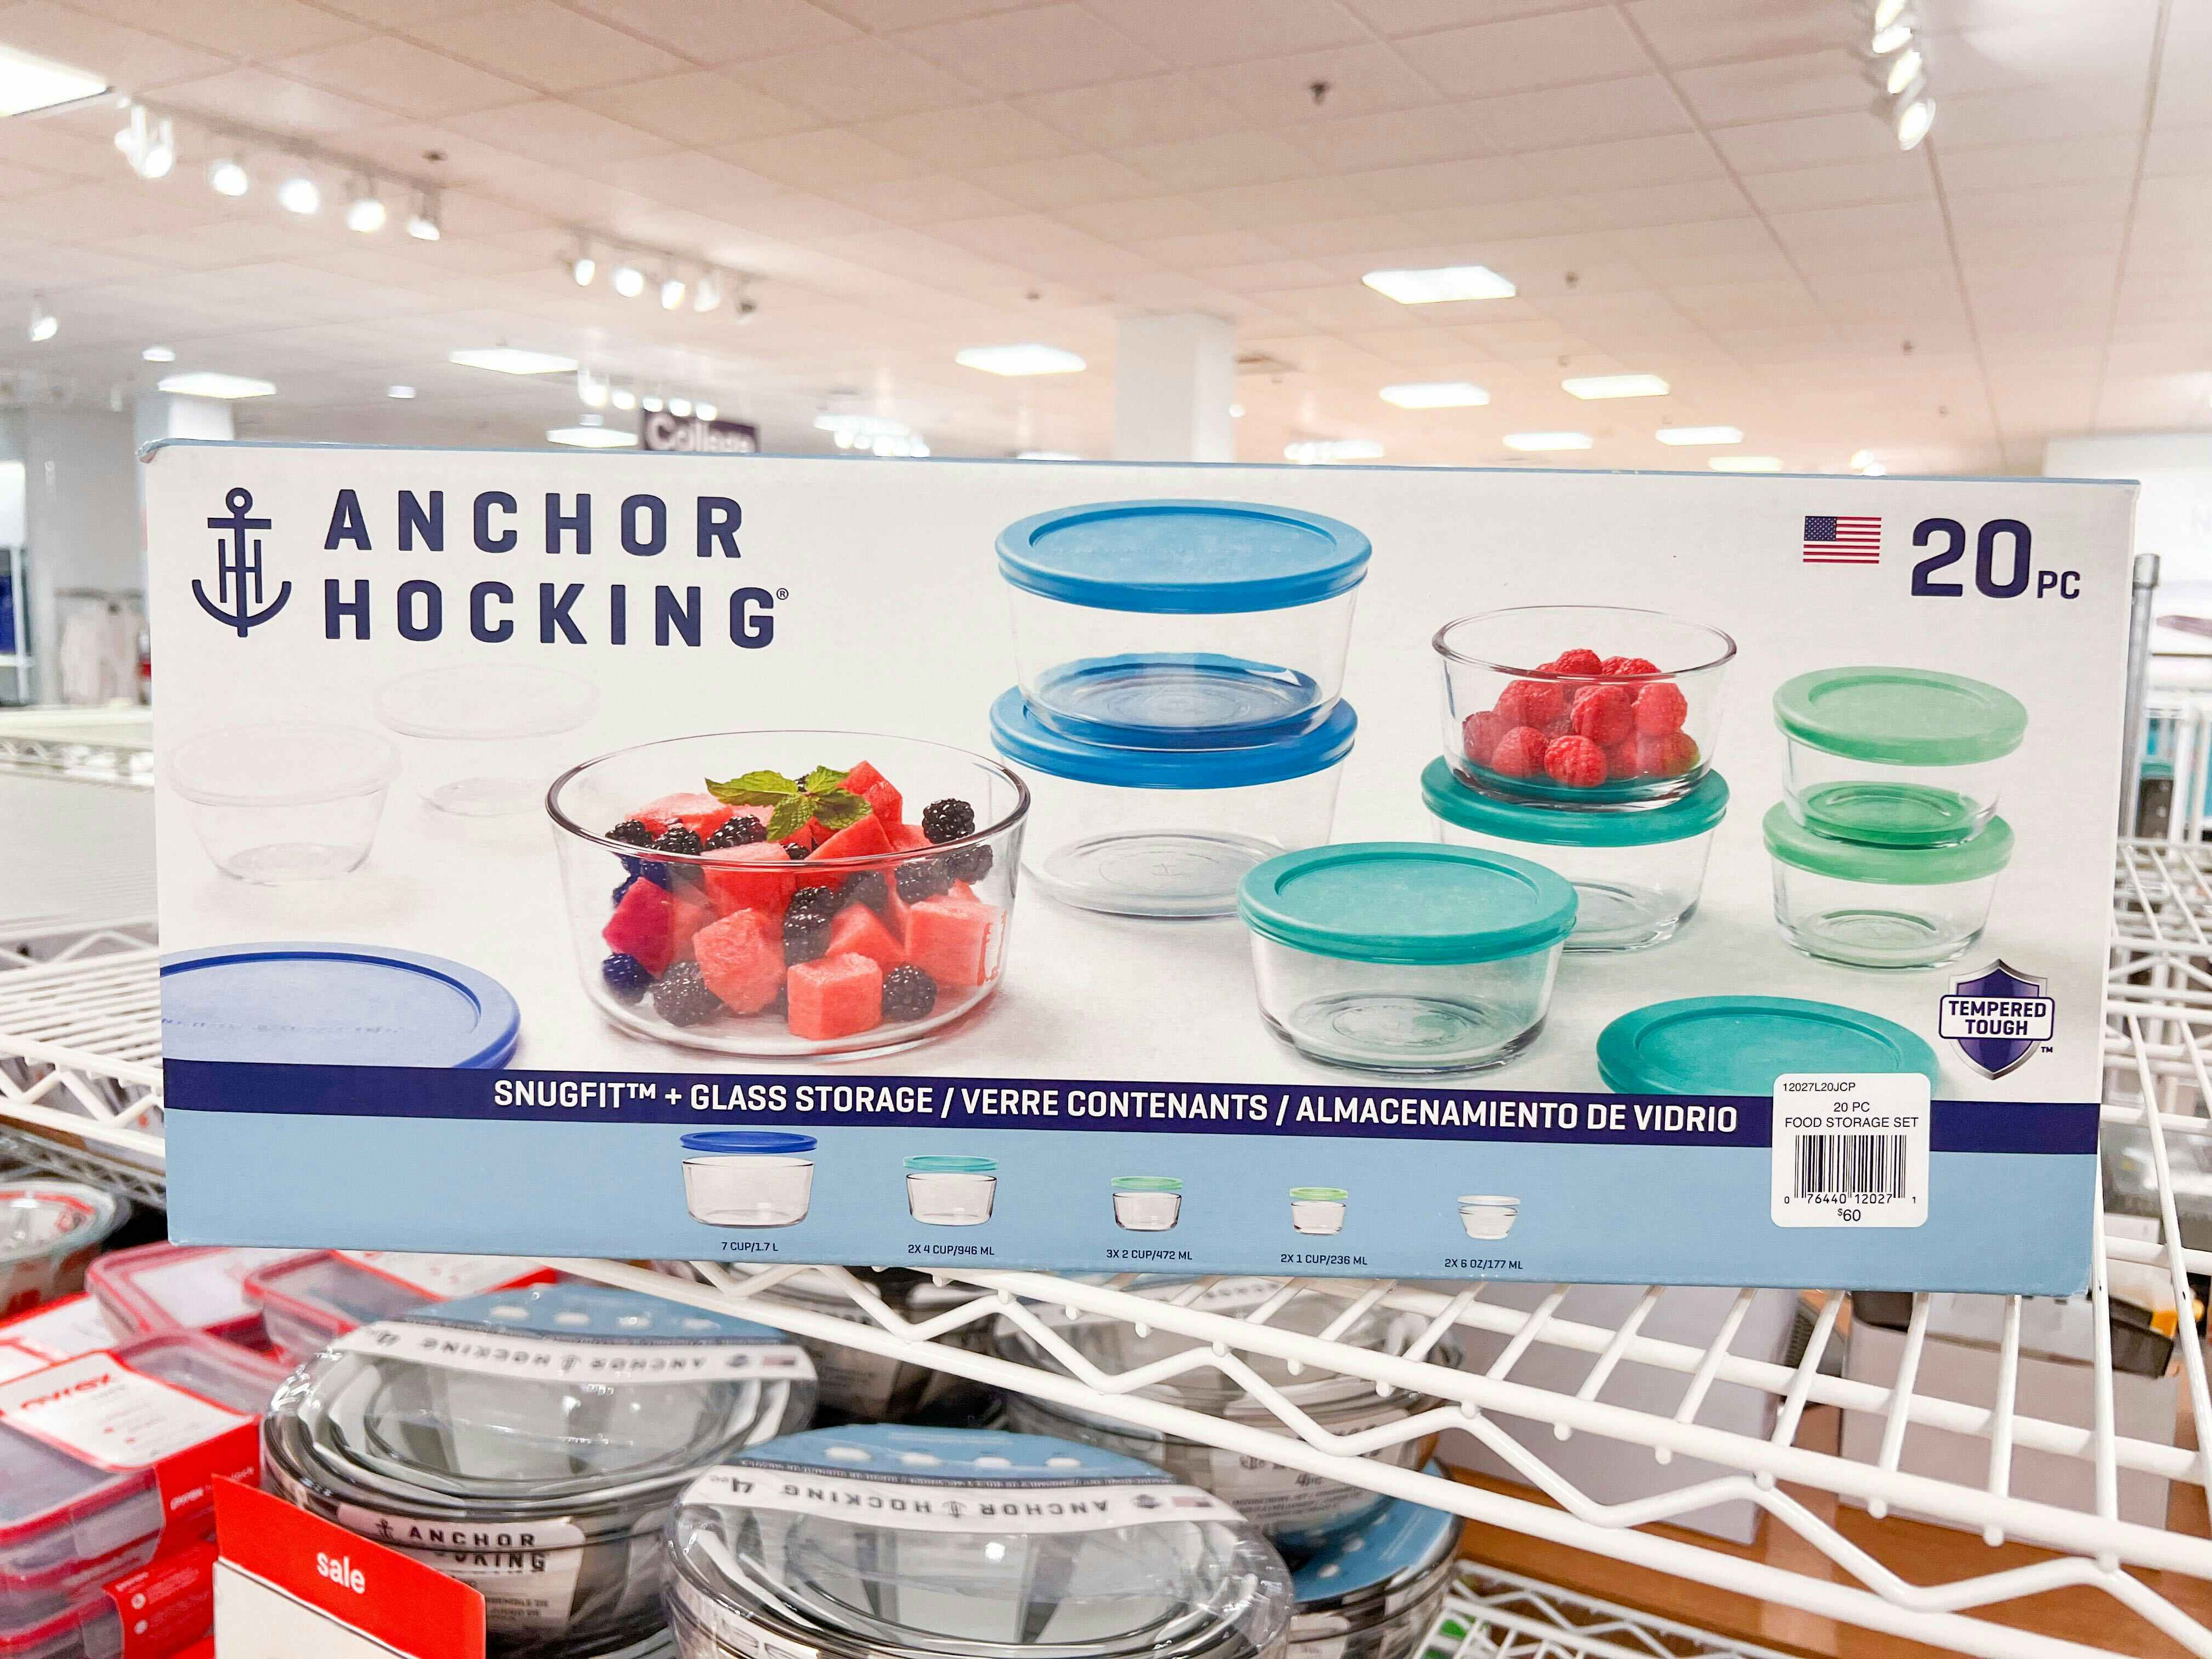 Anchor Hocking 20-Piece Storage Set for $18.99 and More Deals at Target